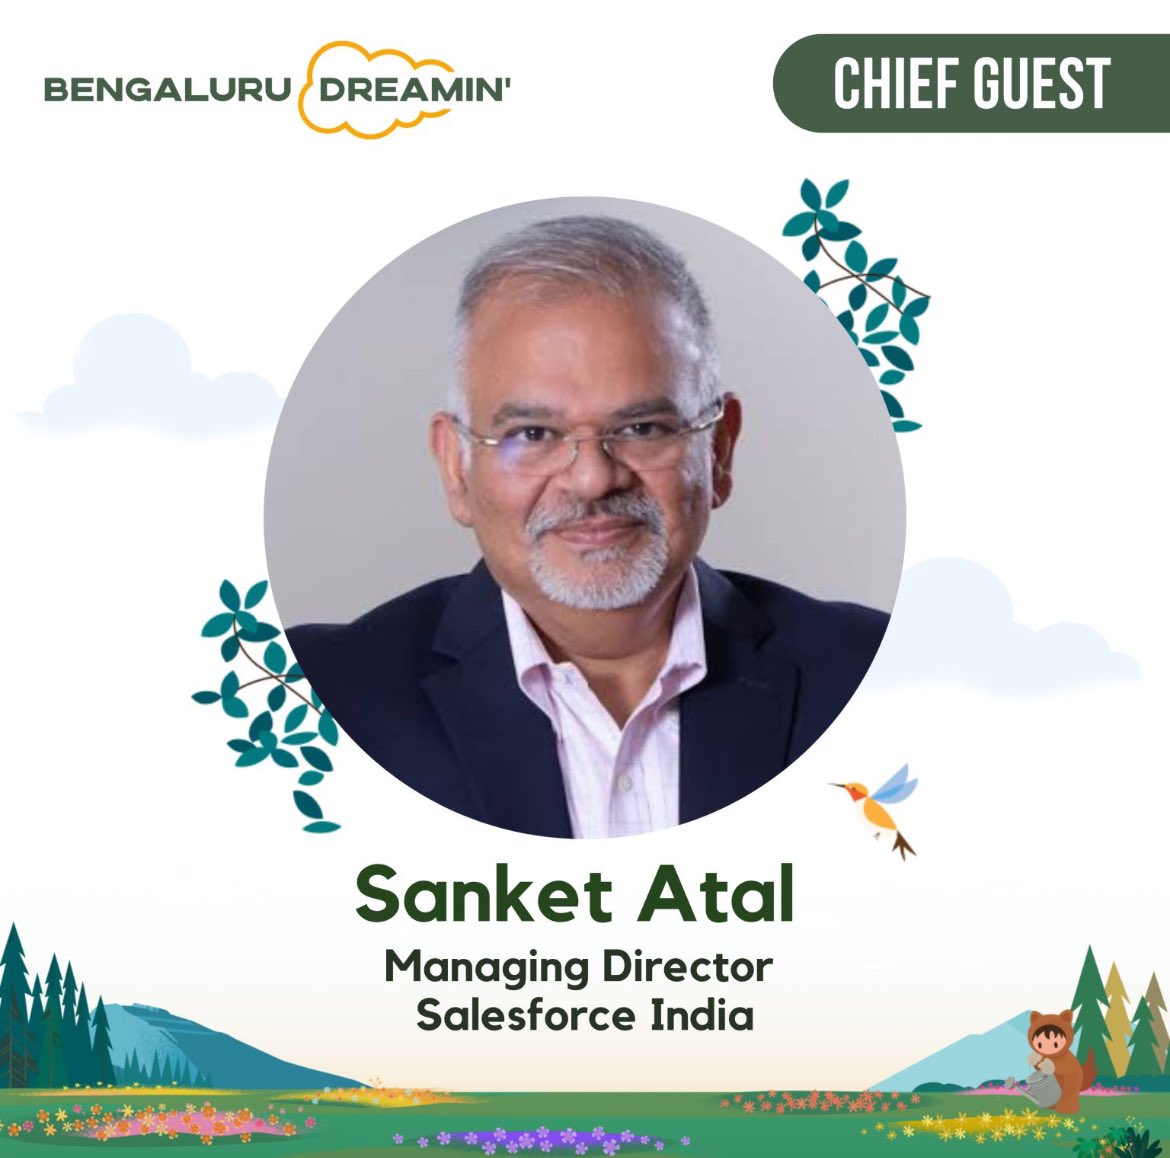 We are excited to announce that @SanketAtal, Managing Director of Salesforce India Operations and Site Lead for Technology & Product, will be joining us as the chief guest for the upcoming Bengaluru Dreamin' Conference! More details👇 linkedin.com/posts/bengalur… #BengaluruDreamin24